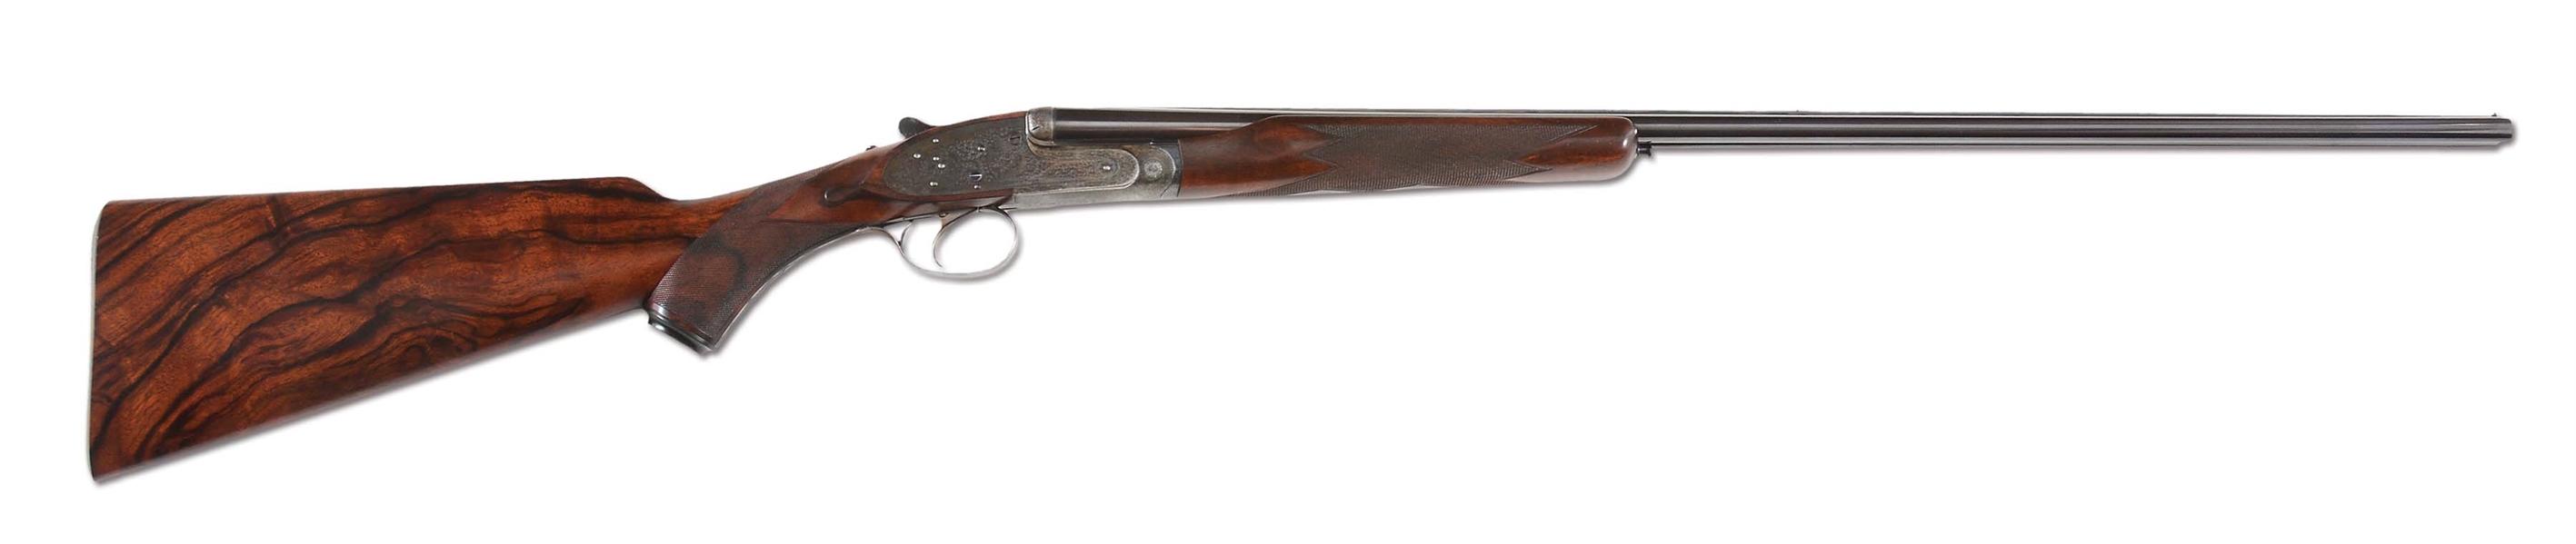 (C) RARE AND DESIRABLE .410 J. PURDEY & SONS SIDELOCK EJECTOR, SINGLE TRIGGER GAME SHOTGUN WITH BEAVERTAIL FOREND AND VENTILATED RIB IN ORIGINAL CASE WITH ACCESSORIES.